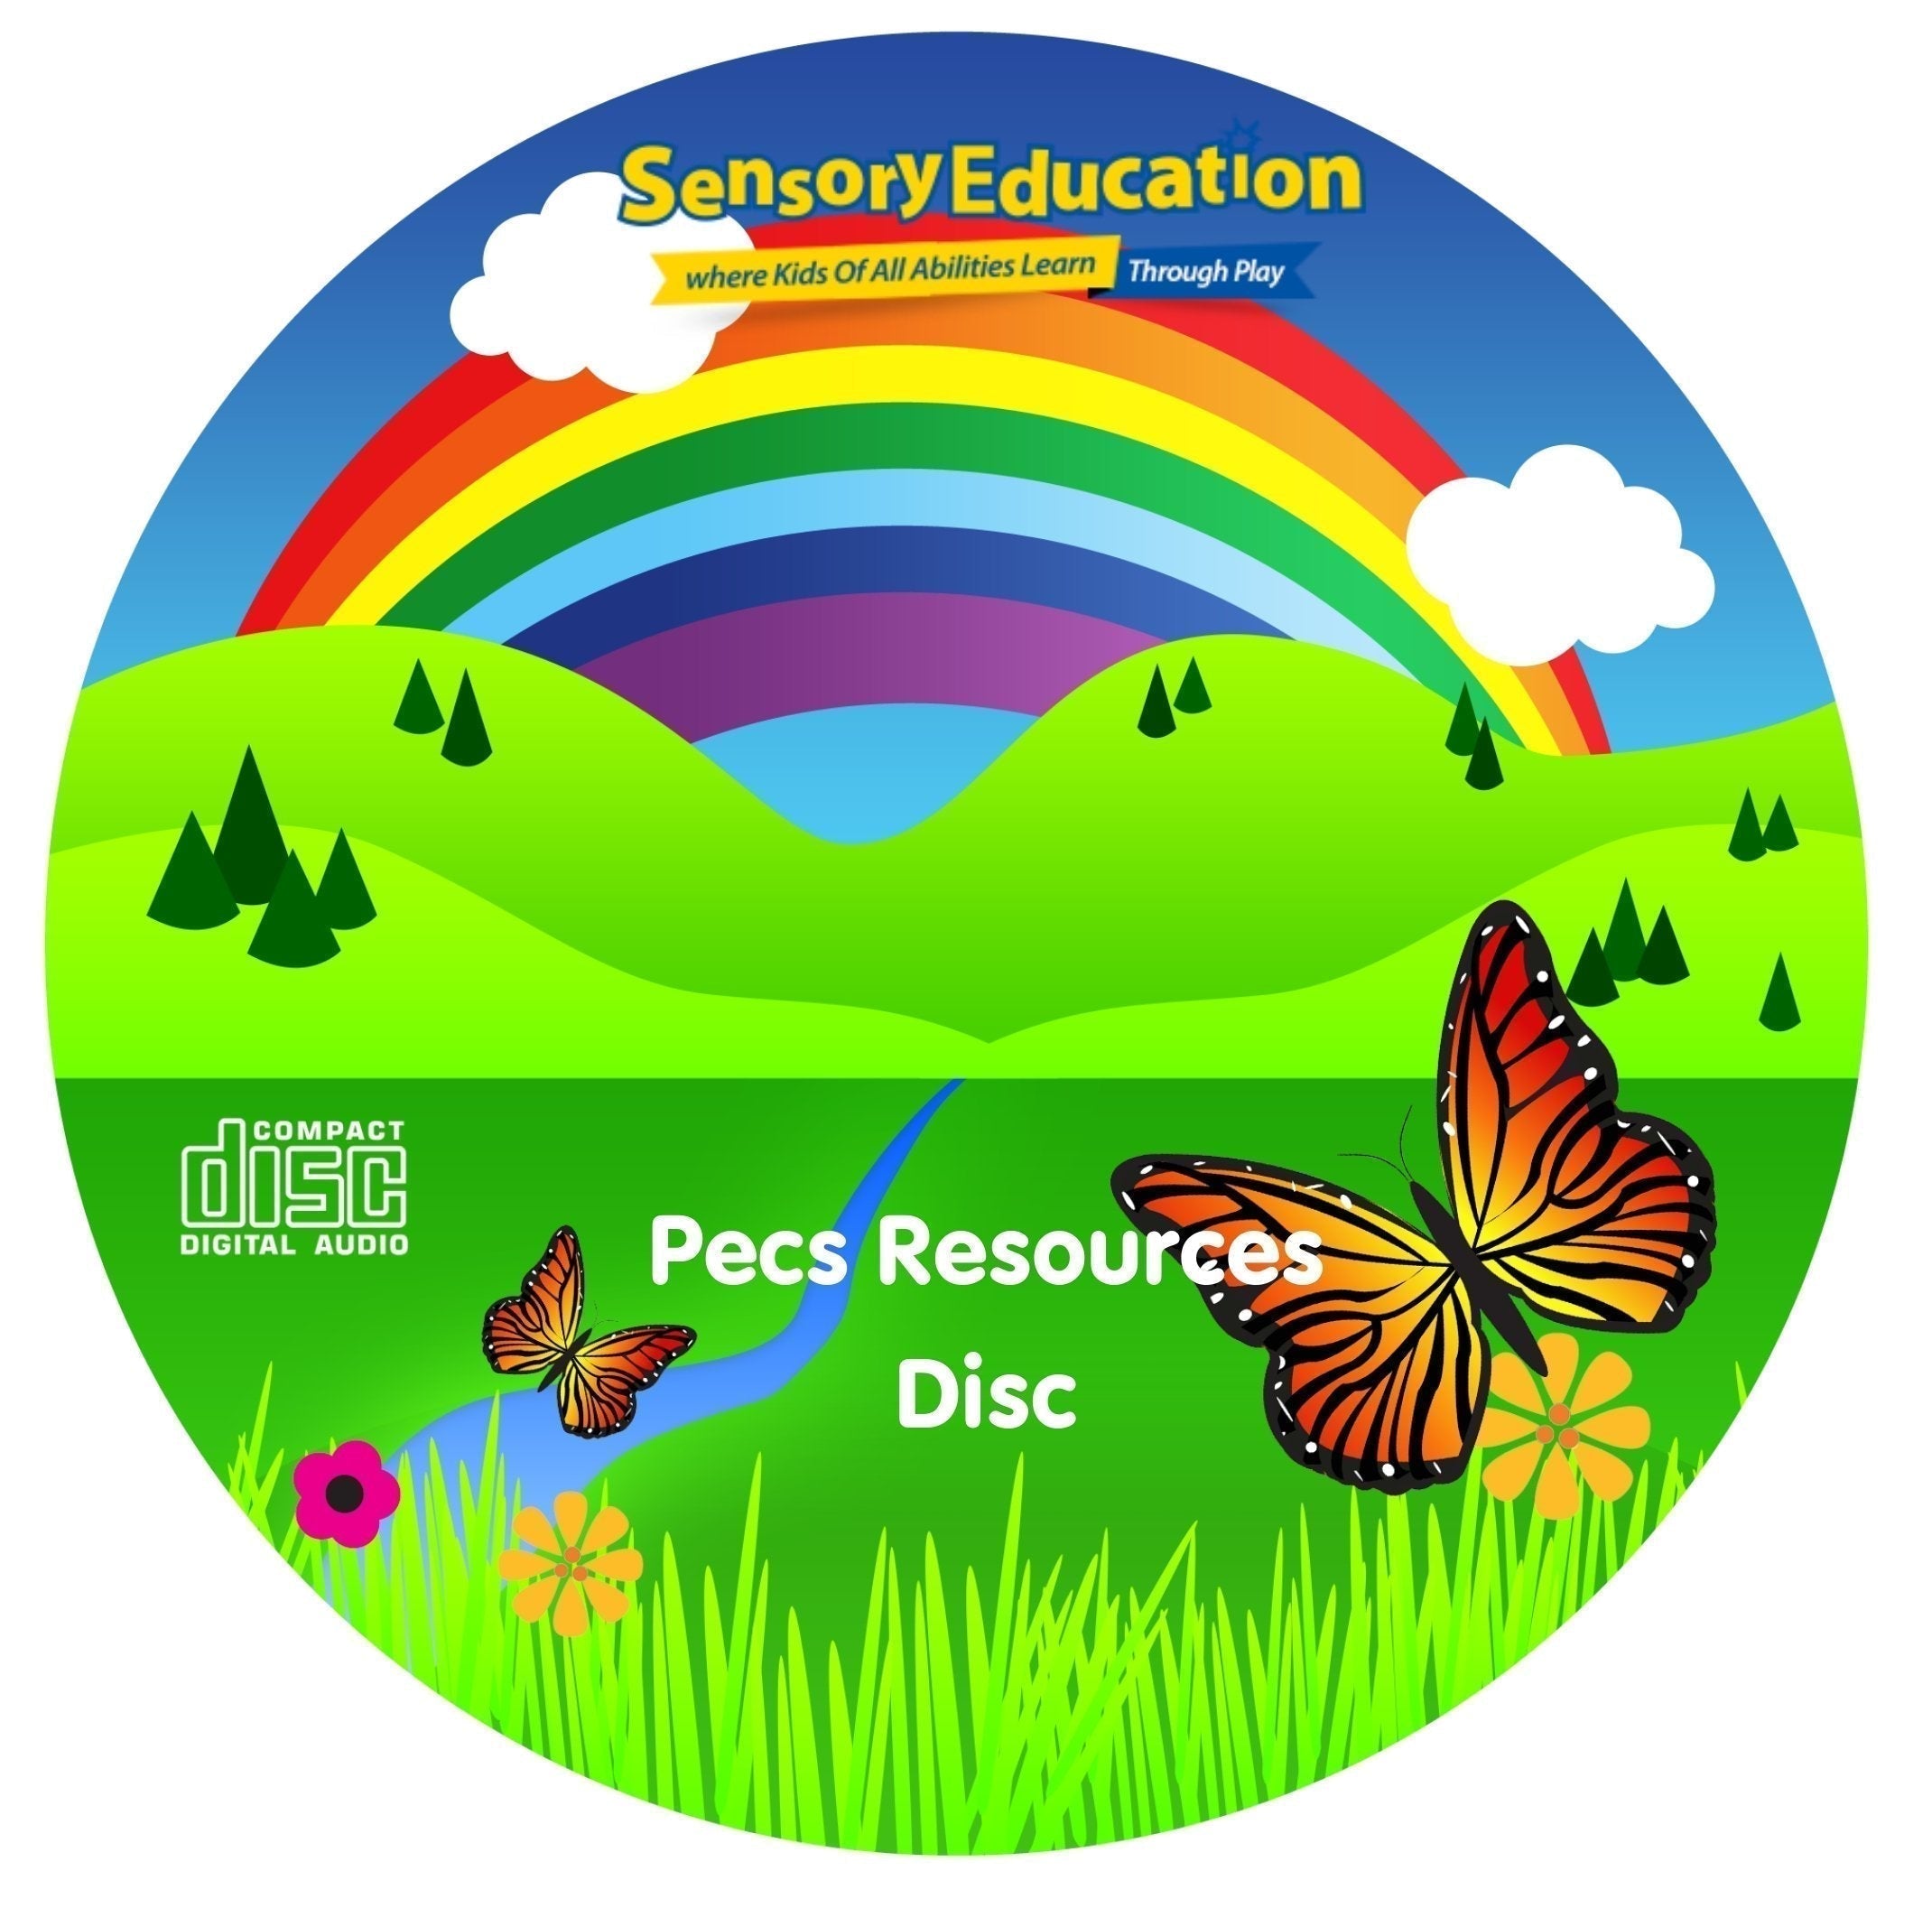 Pecs Resource Disc- pecs resources,pecs cards,pecs card,pecs autism,pecs,cheap pecs cards,pecs card,how to use pecs,pecs items,pec cards,pecs,pecs electronic,pecs disc,pecs,pecs cards,pecs routine,pecs routine boards,This fantastic Pecs resource disc resource is ready to print and images can be resized. This Pecs resource disc package is suitable for anyone with communication difficulties. A fantastic addition to anyones visual aid collection, make your own Visual boards, Schedule Boards, Keyrings Pecs imag